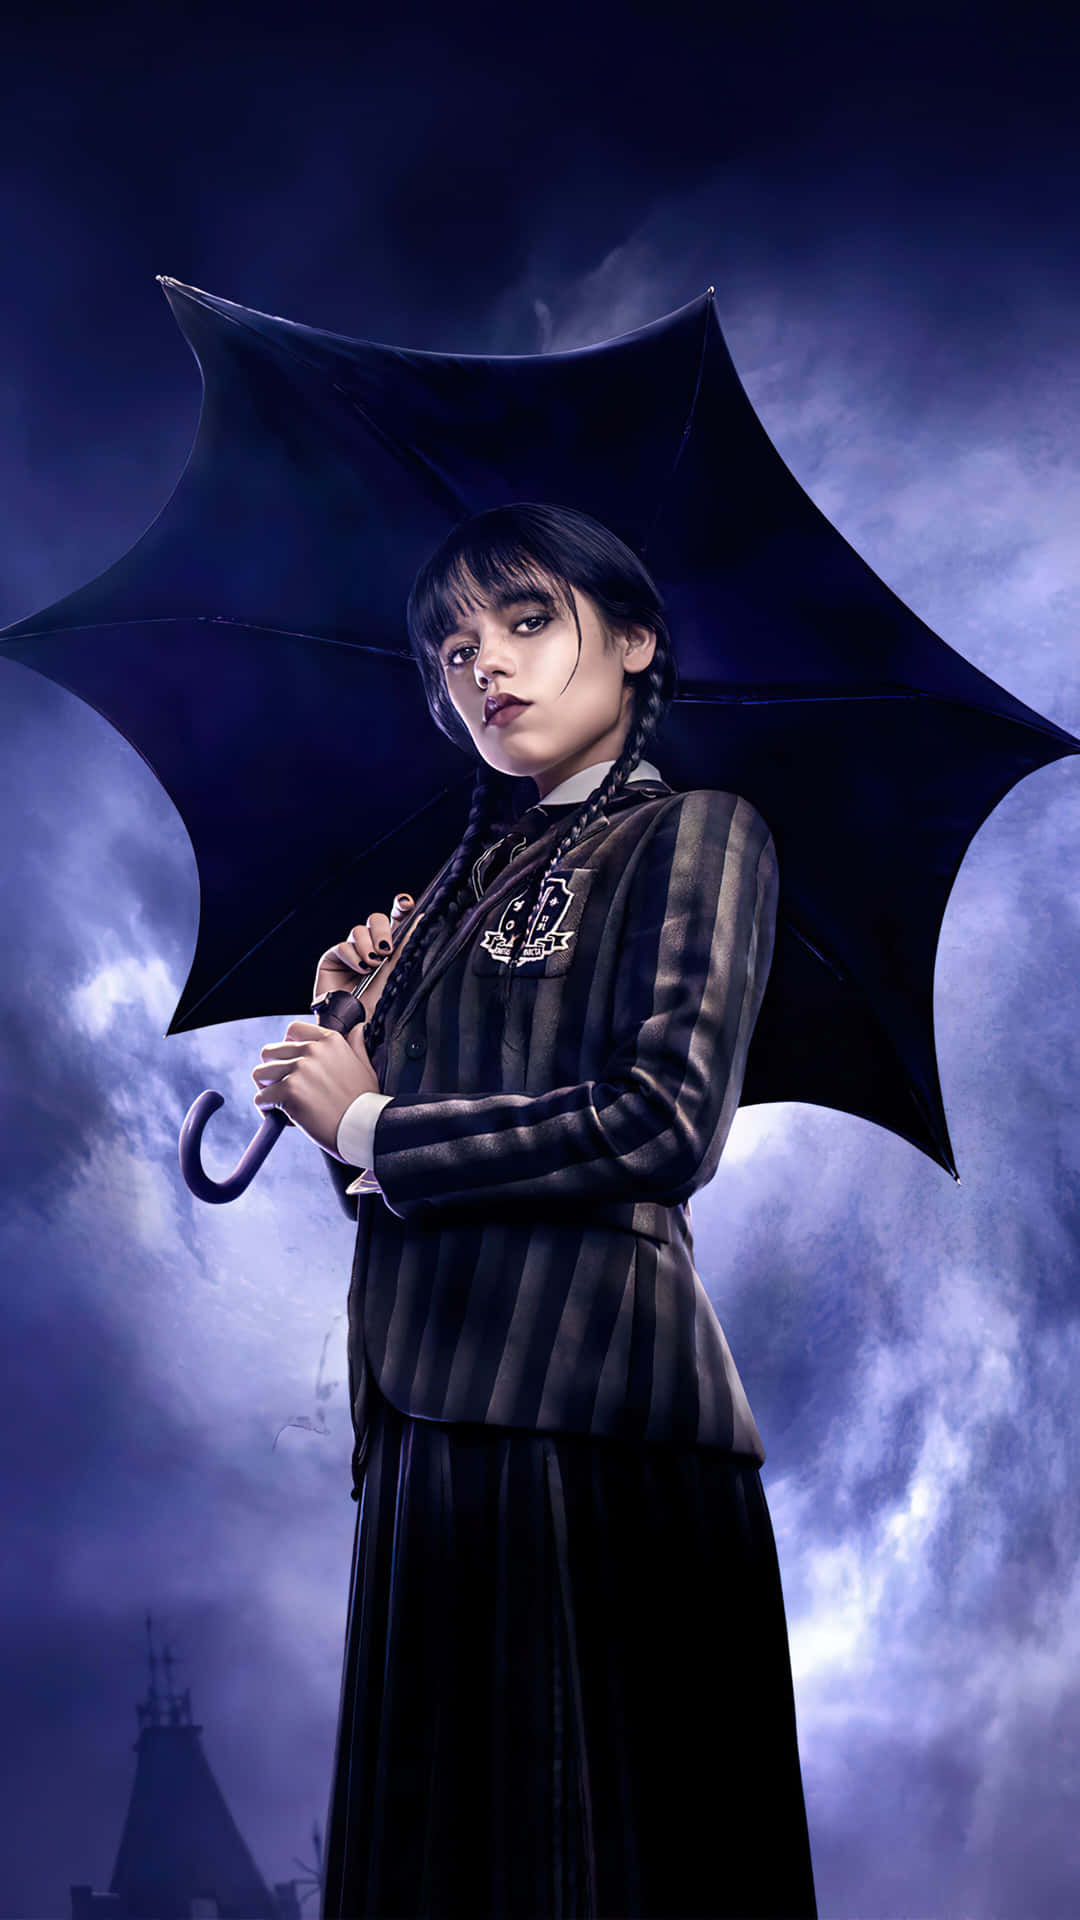 Gothic_ Girl_with_ Umbrella Wallpaper